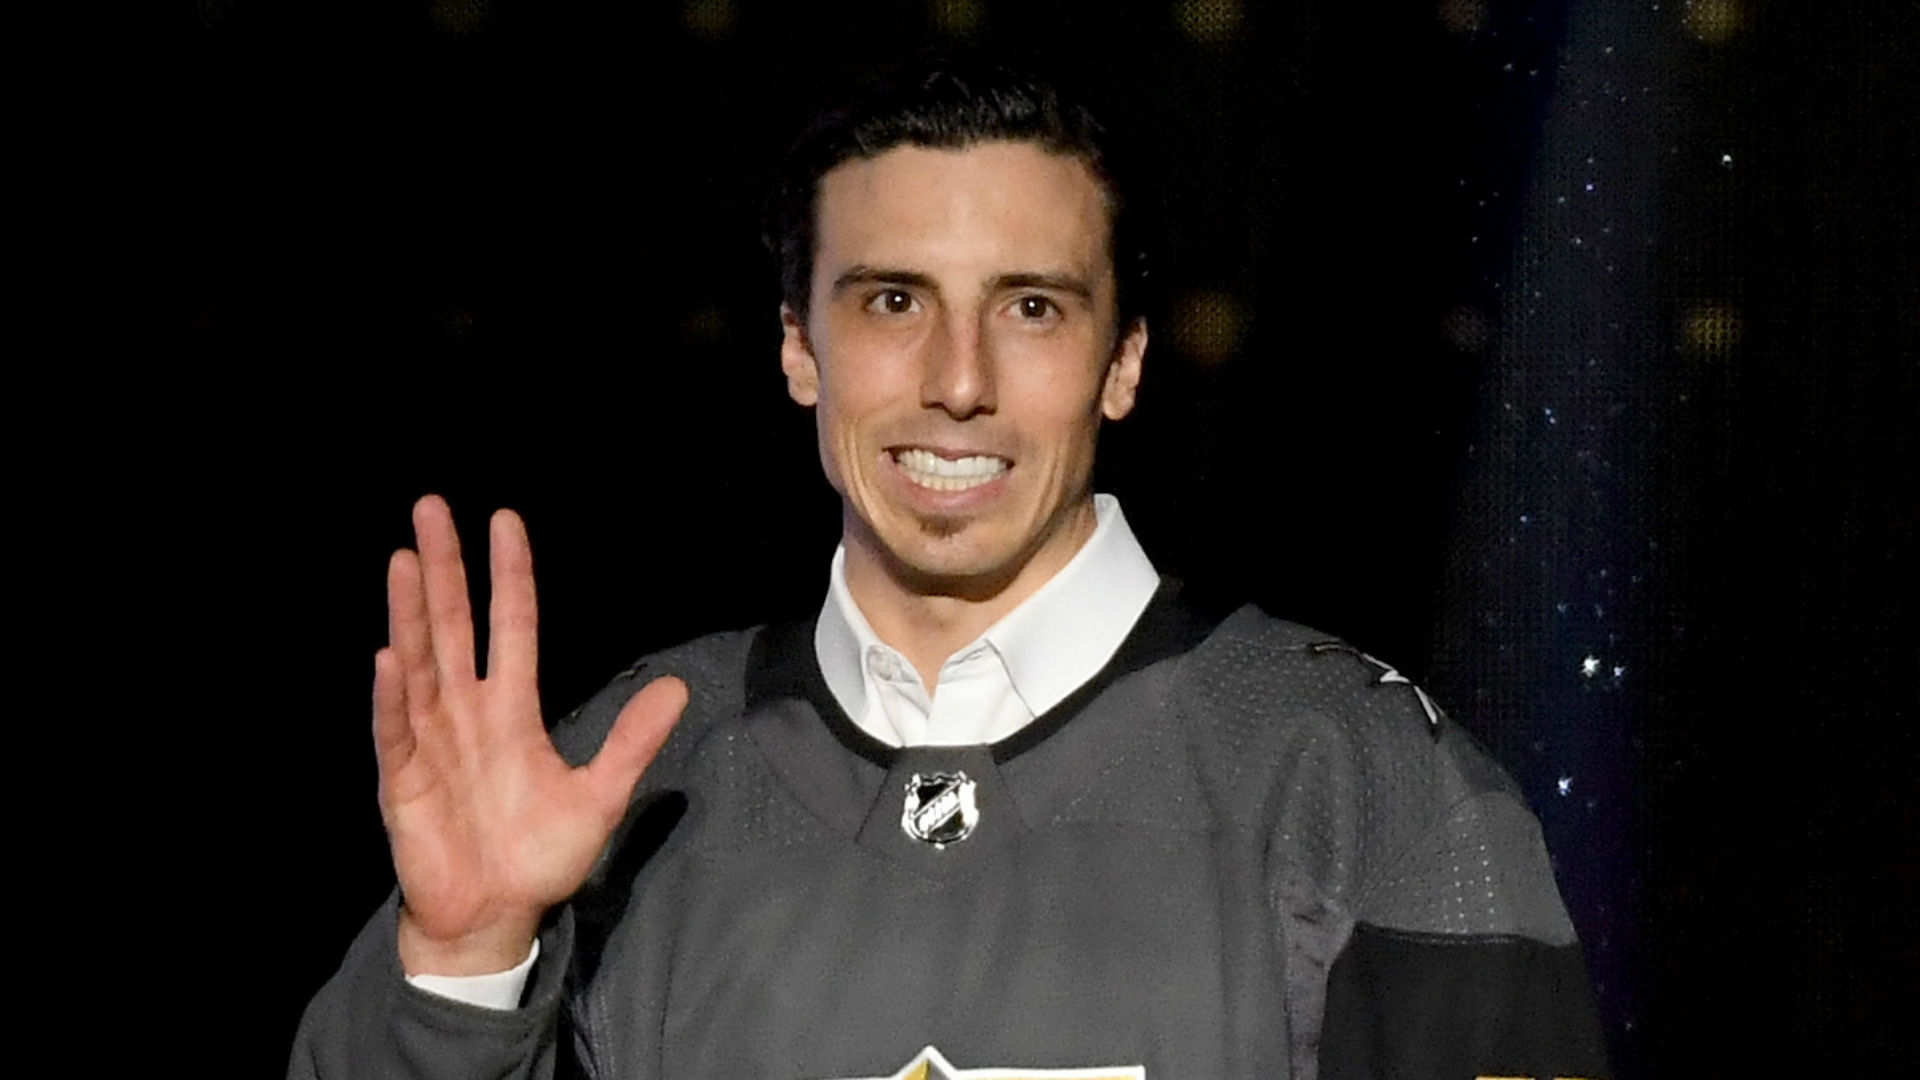 Watch: Marc-Andre Fleury met with ovation in return to Pittsburgh